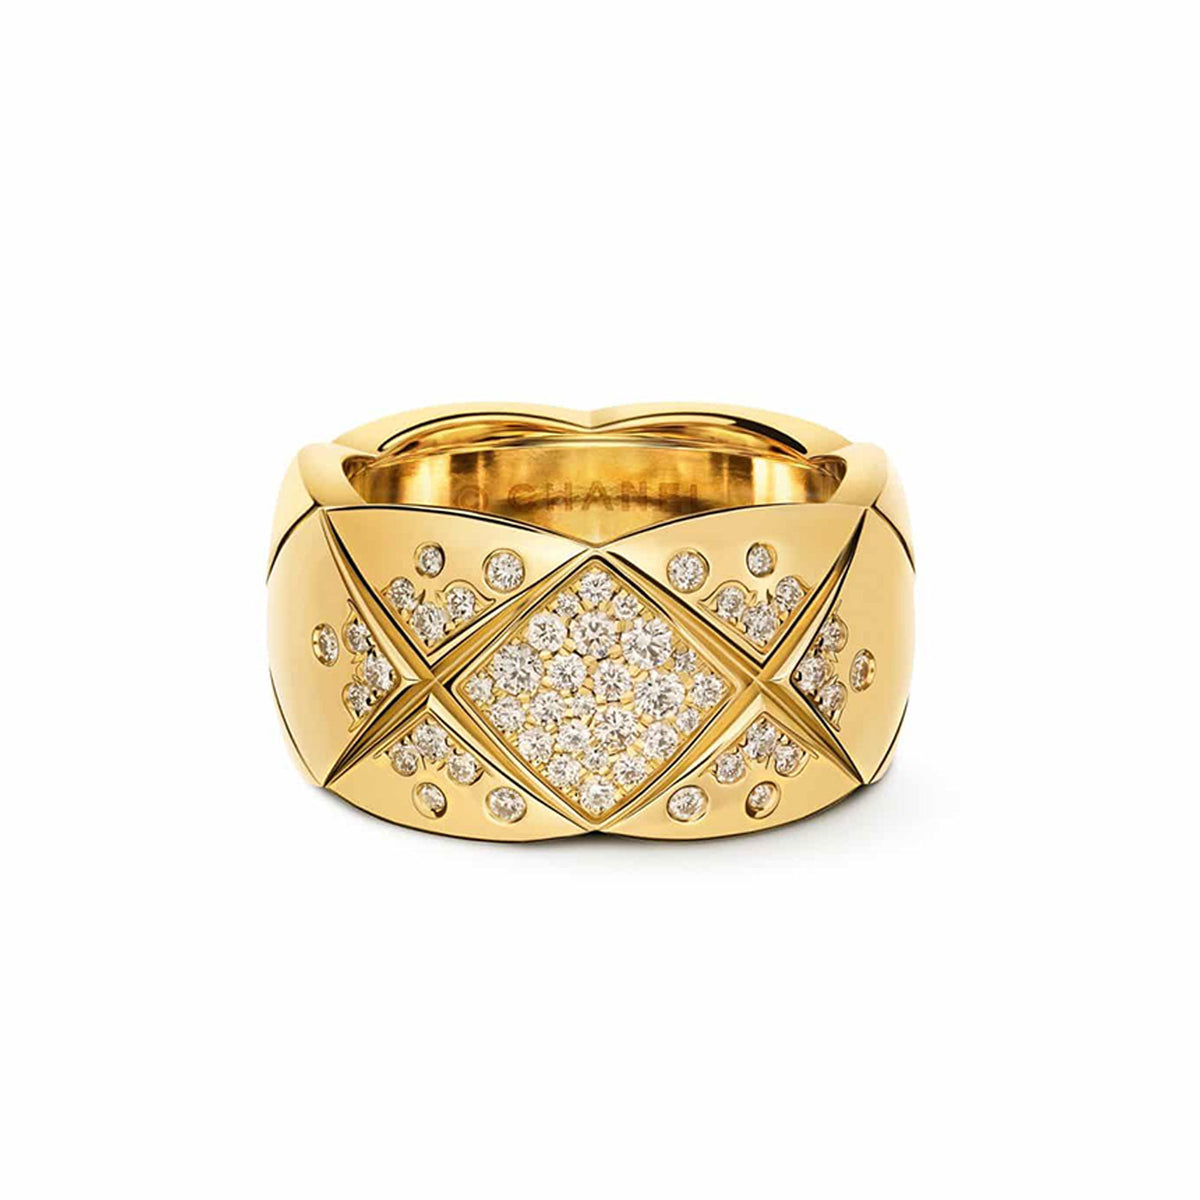 Chanel Coco Crush Ring Quilted Motif, Mini Version, 18k White Gold,  Diamonds J11871 - JewelryReluxe